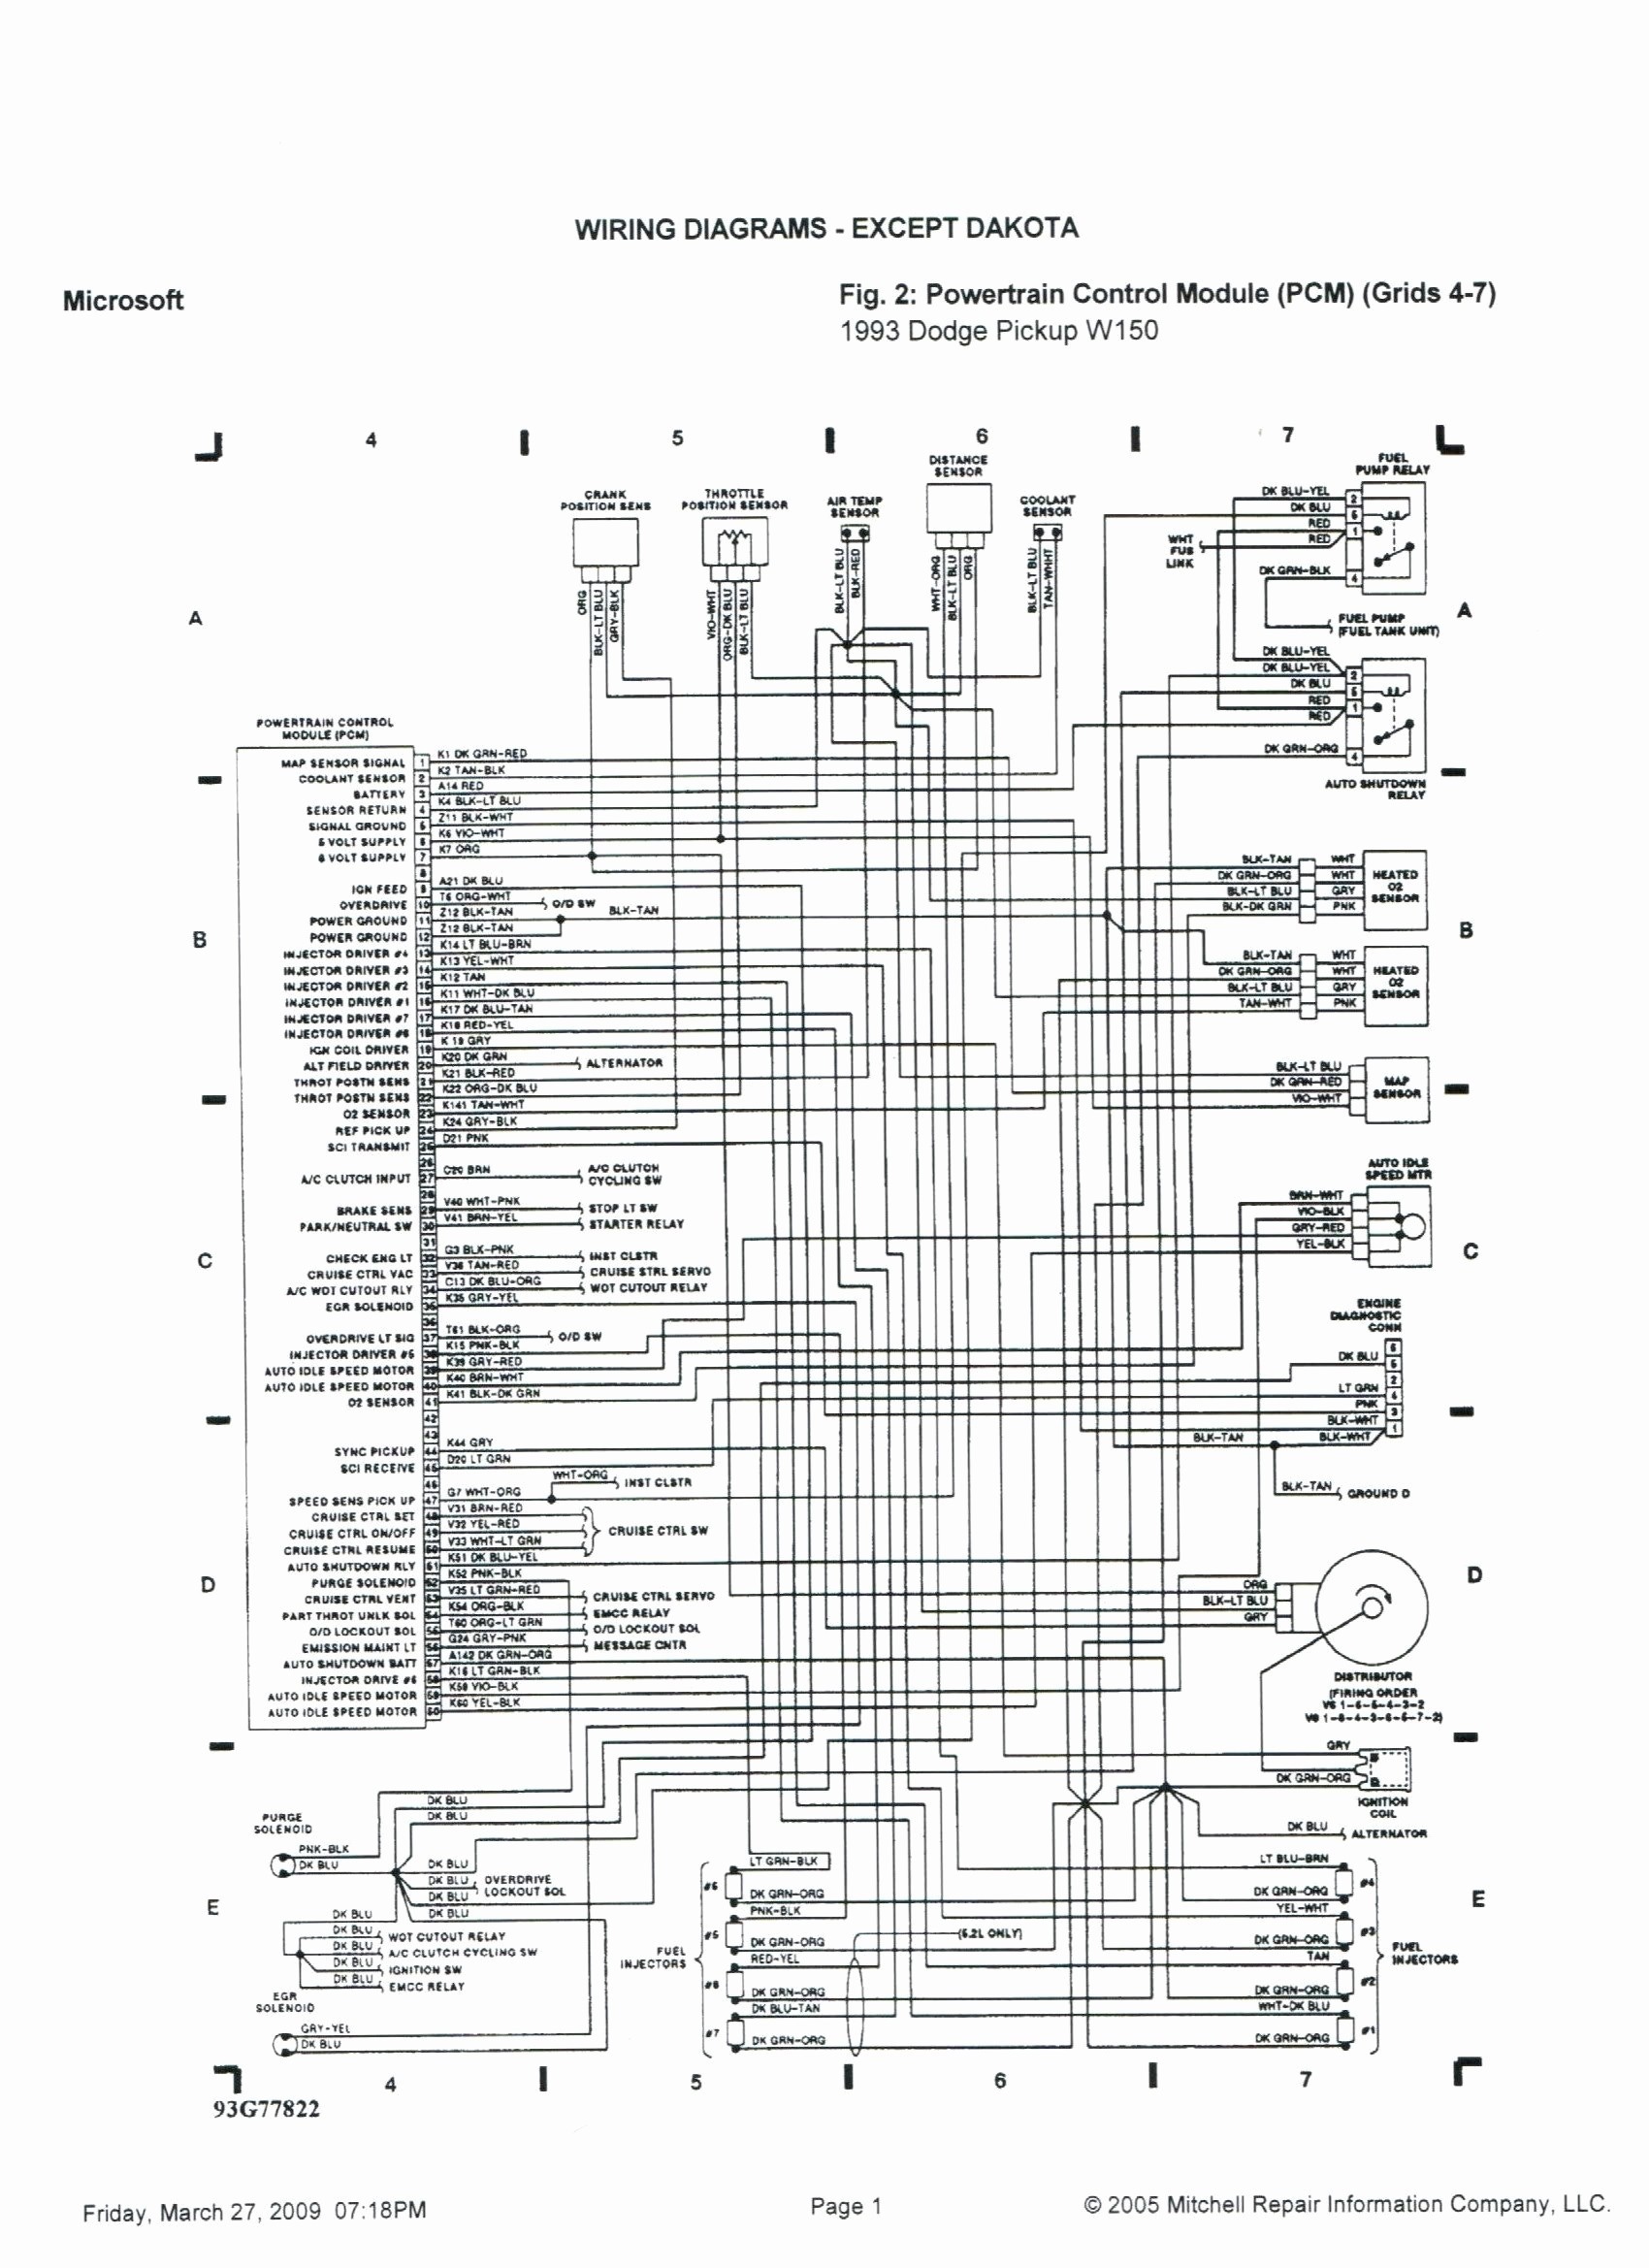 2005 Dodge Ram Stereo Wiring Diagrams Infinity Sm 0685] Wiring Diagram to Her with Dodge Ram 1500 Radio Of 2005 Dodge Ram Stereo Wiring Diagrams Infinity